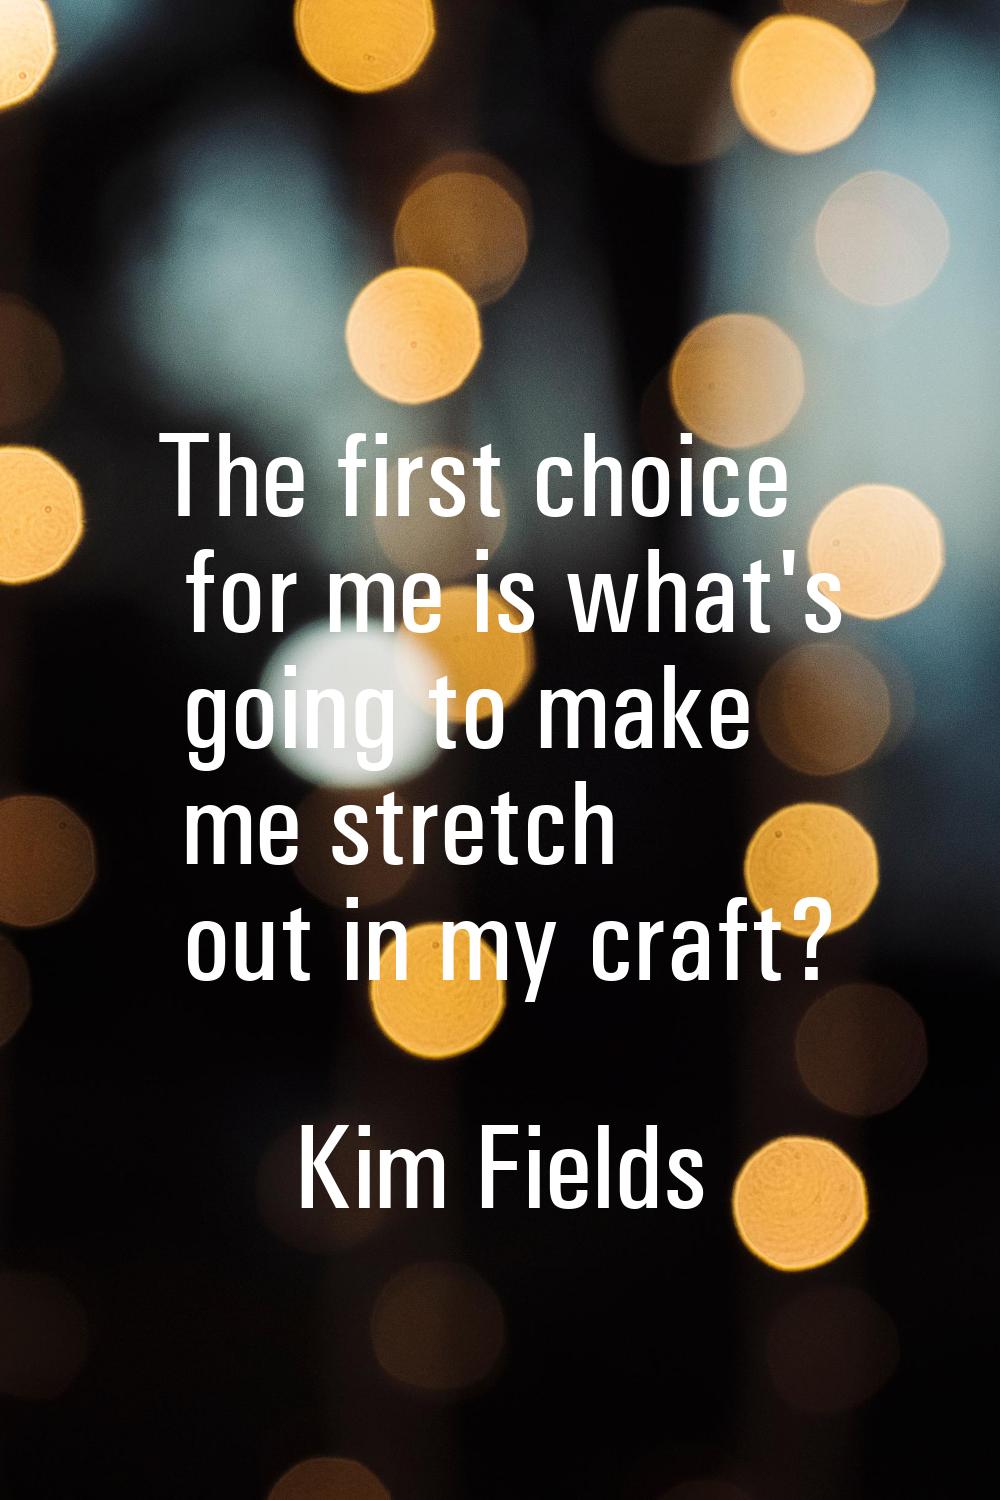 The first choice for me is what's going to make me stretch out in my craft?